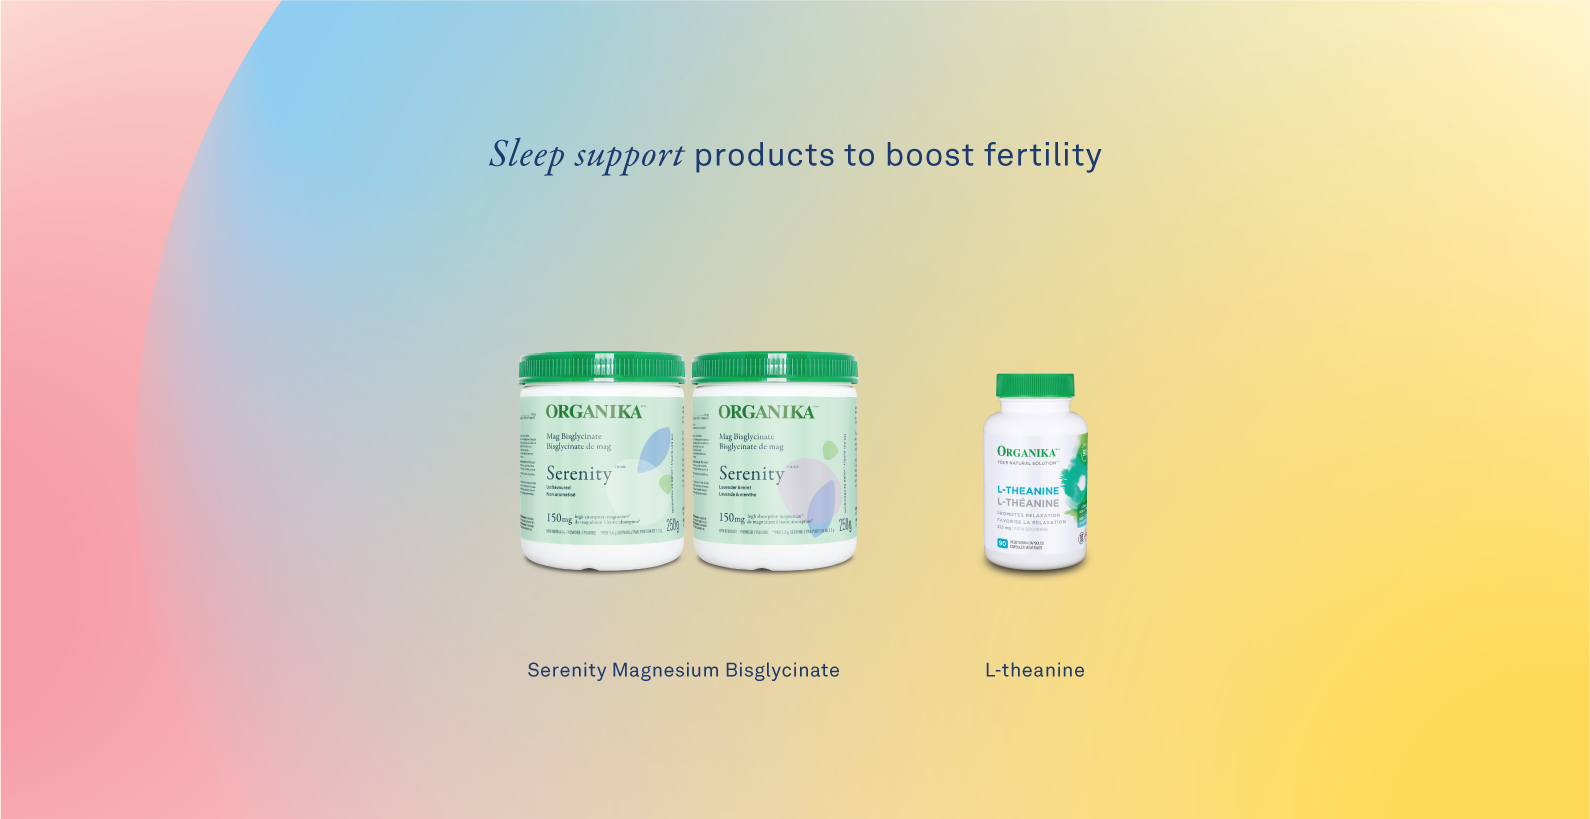 Sleep support products to boost fertility